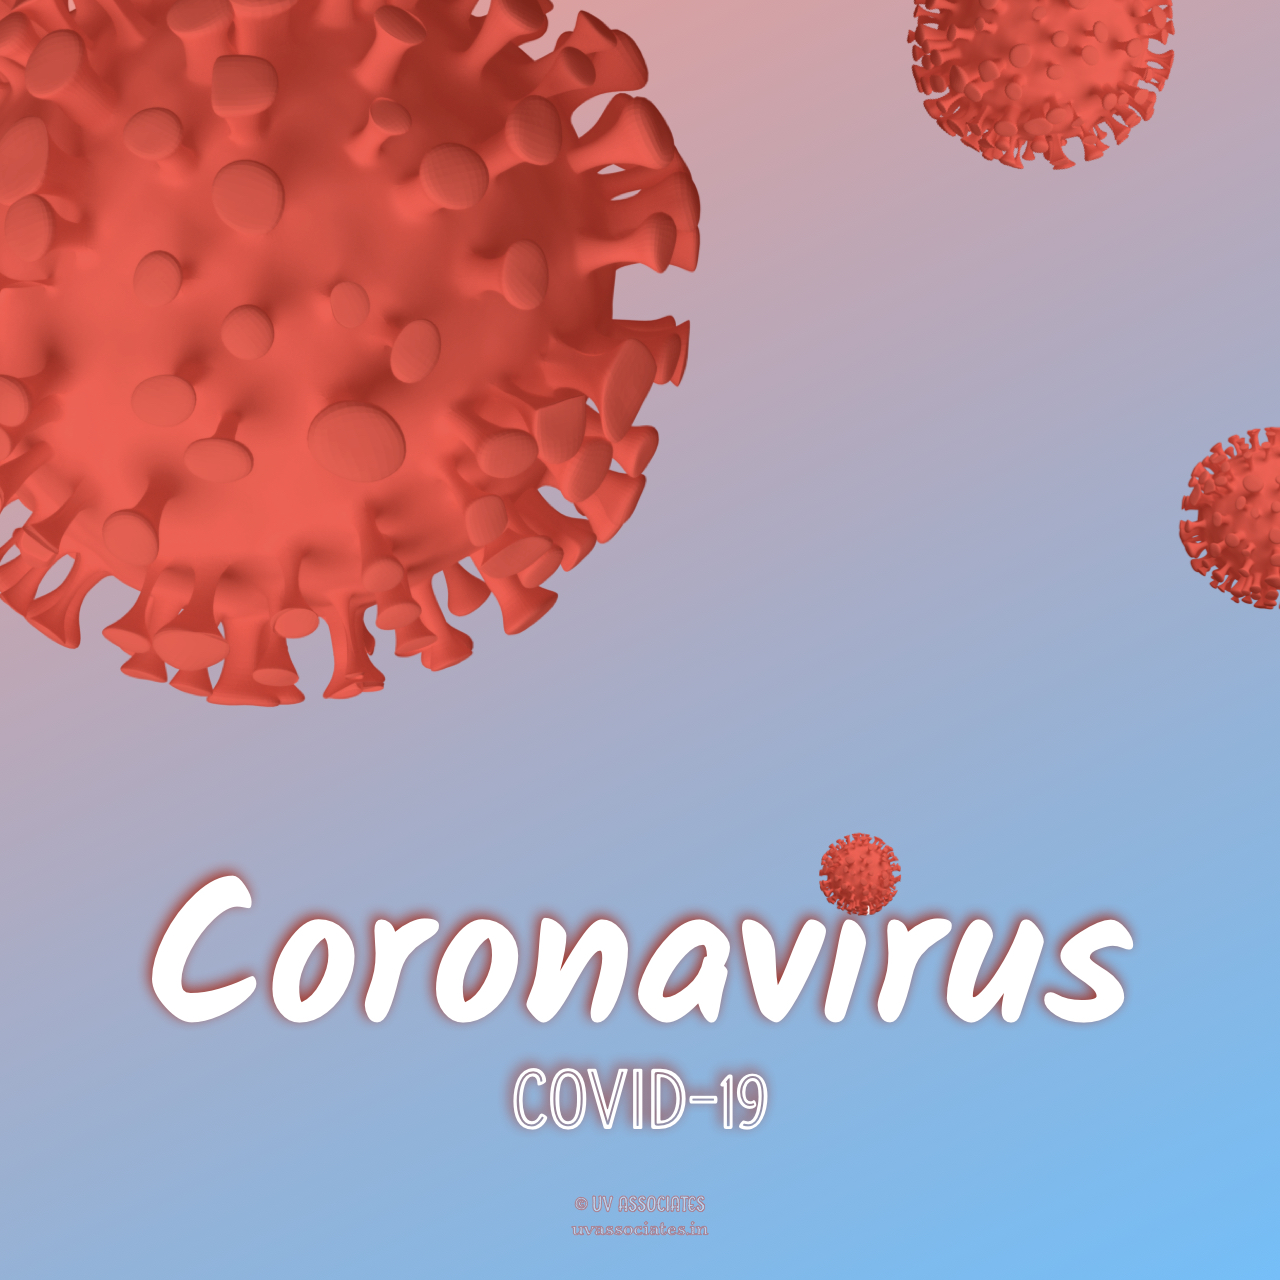 Red Coronavirus Cells on a Gradient Blue Pink Background 